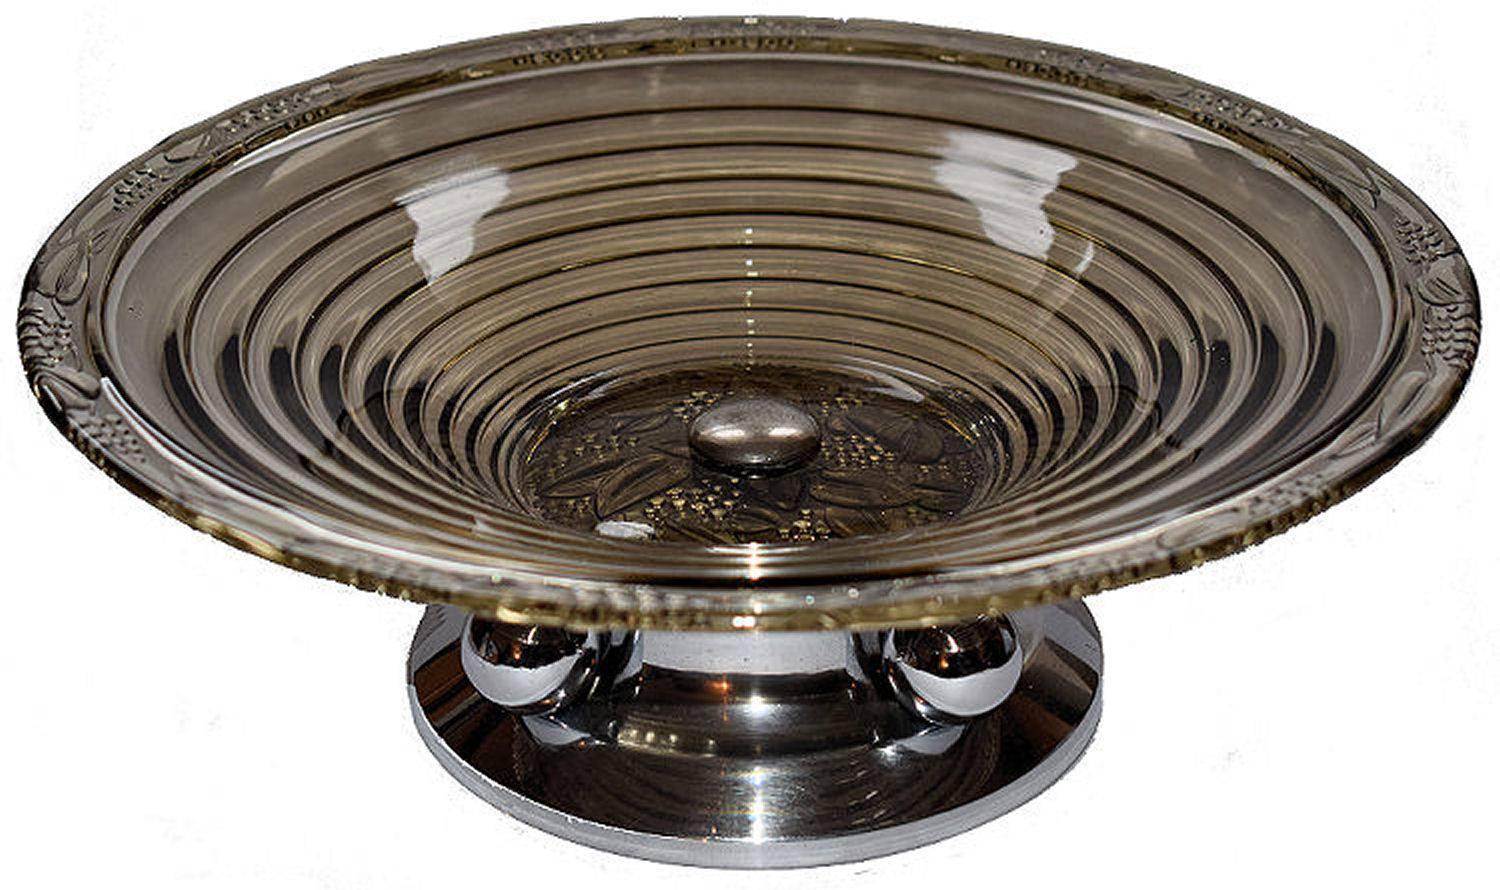 Fabulous French modernist Art Deco glass centre piece coupe fruit bowl. Beautiful design and perfect for your table. These nice deco pieces are getting hard to find. Features a smoke glass bowl supported on a chrome stylised pedestal.